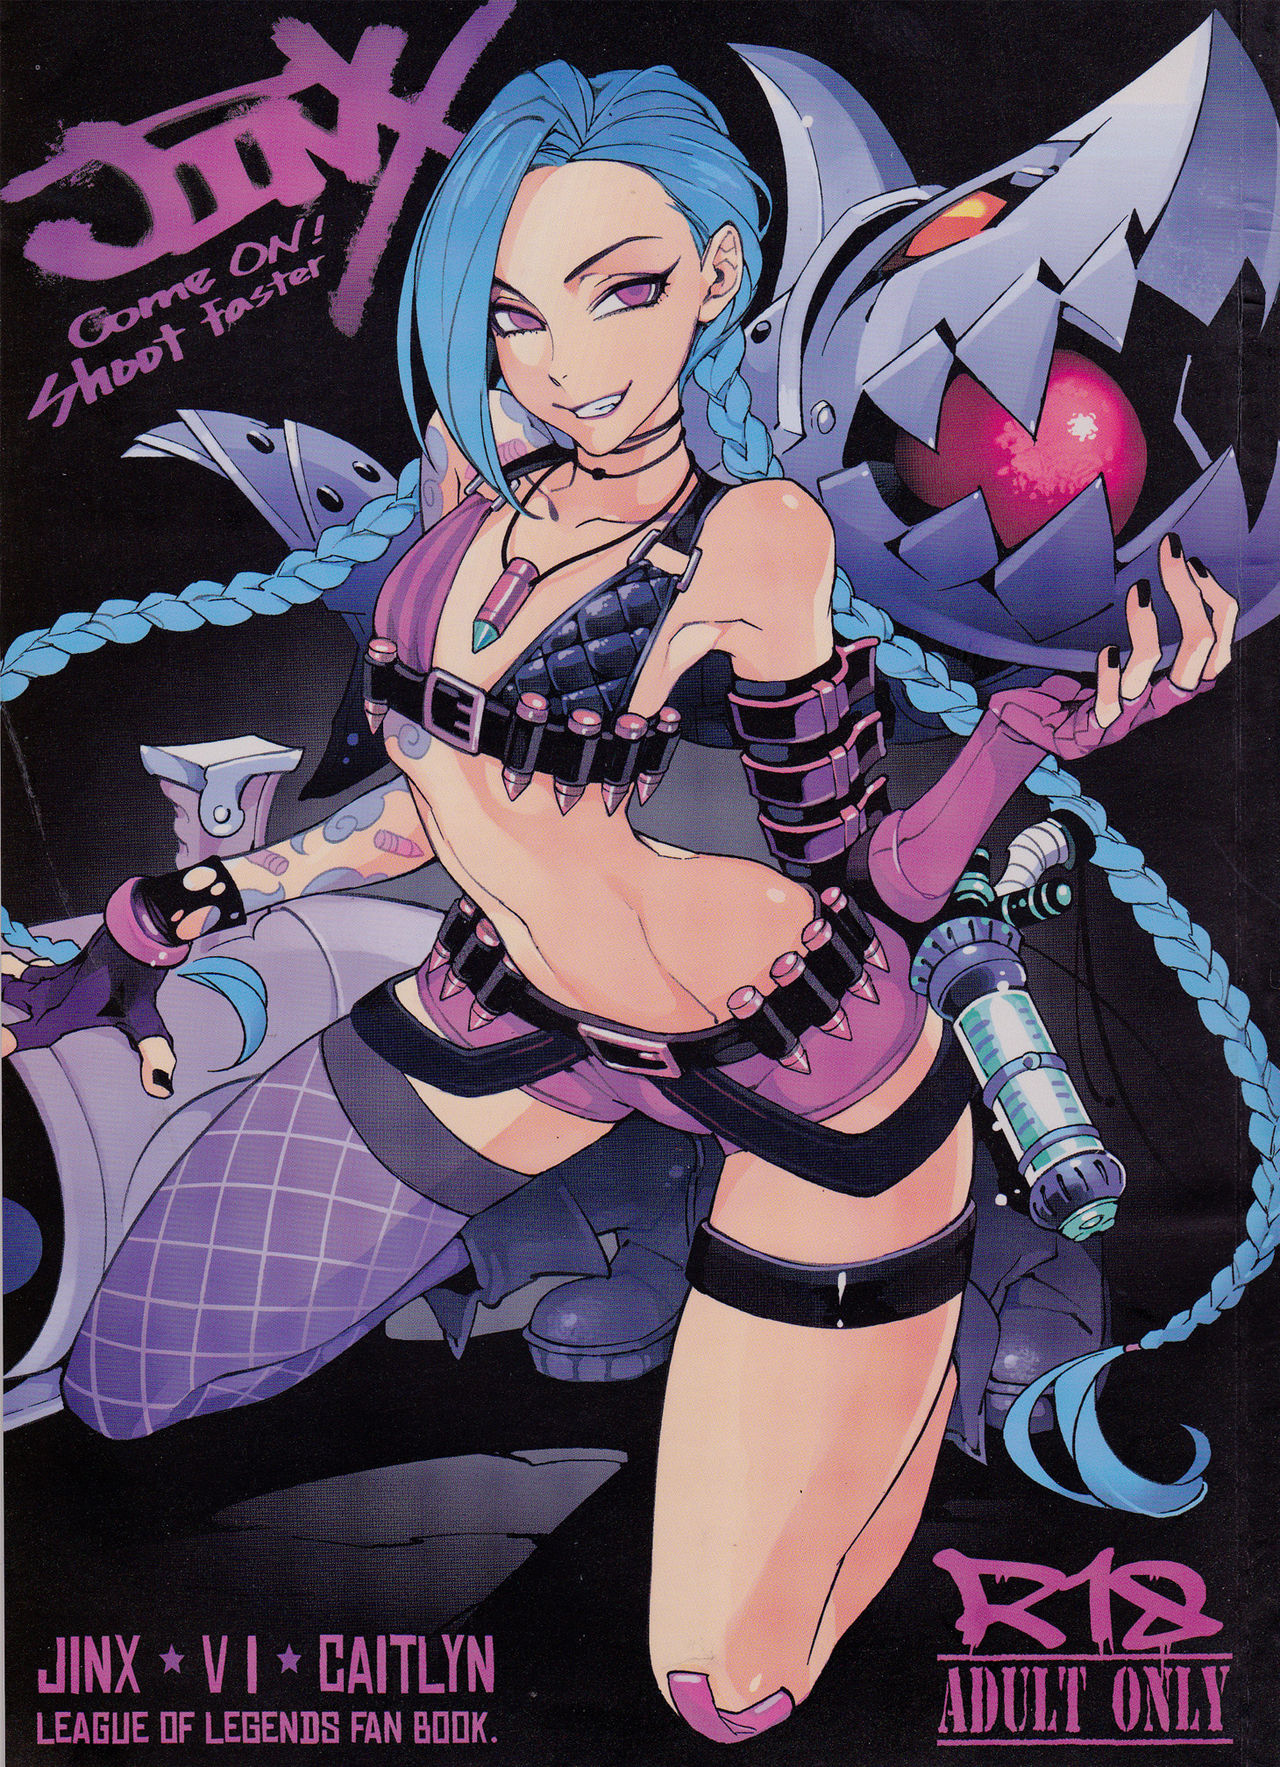 (FF23) [Turtle.Fish.Paint (Hirame Sensei)] JINX Come On! Shoot Faster (League of Legends) [Chinese] (FF23) [Turtle.Fish.Paint (比目魚先生)] JINX Come On! Shoot Faster (リーグ・オブ・レジェンズ) [中国語]